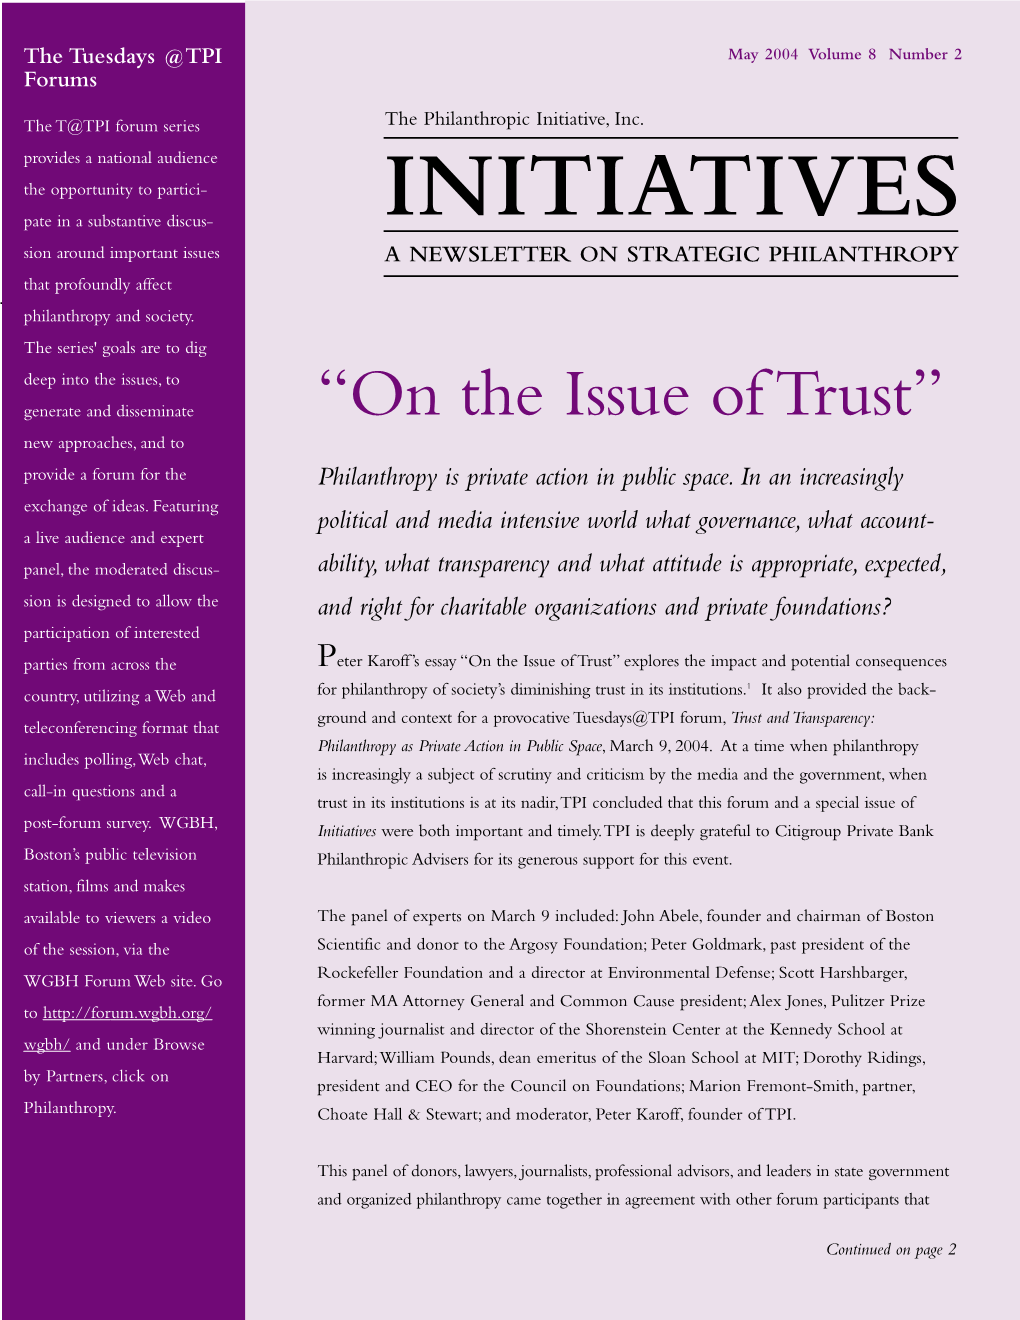 On the Issue of Trust (TPI, 2004)